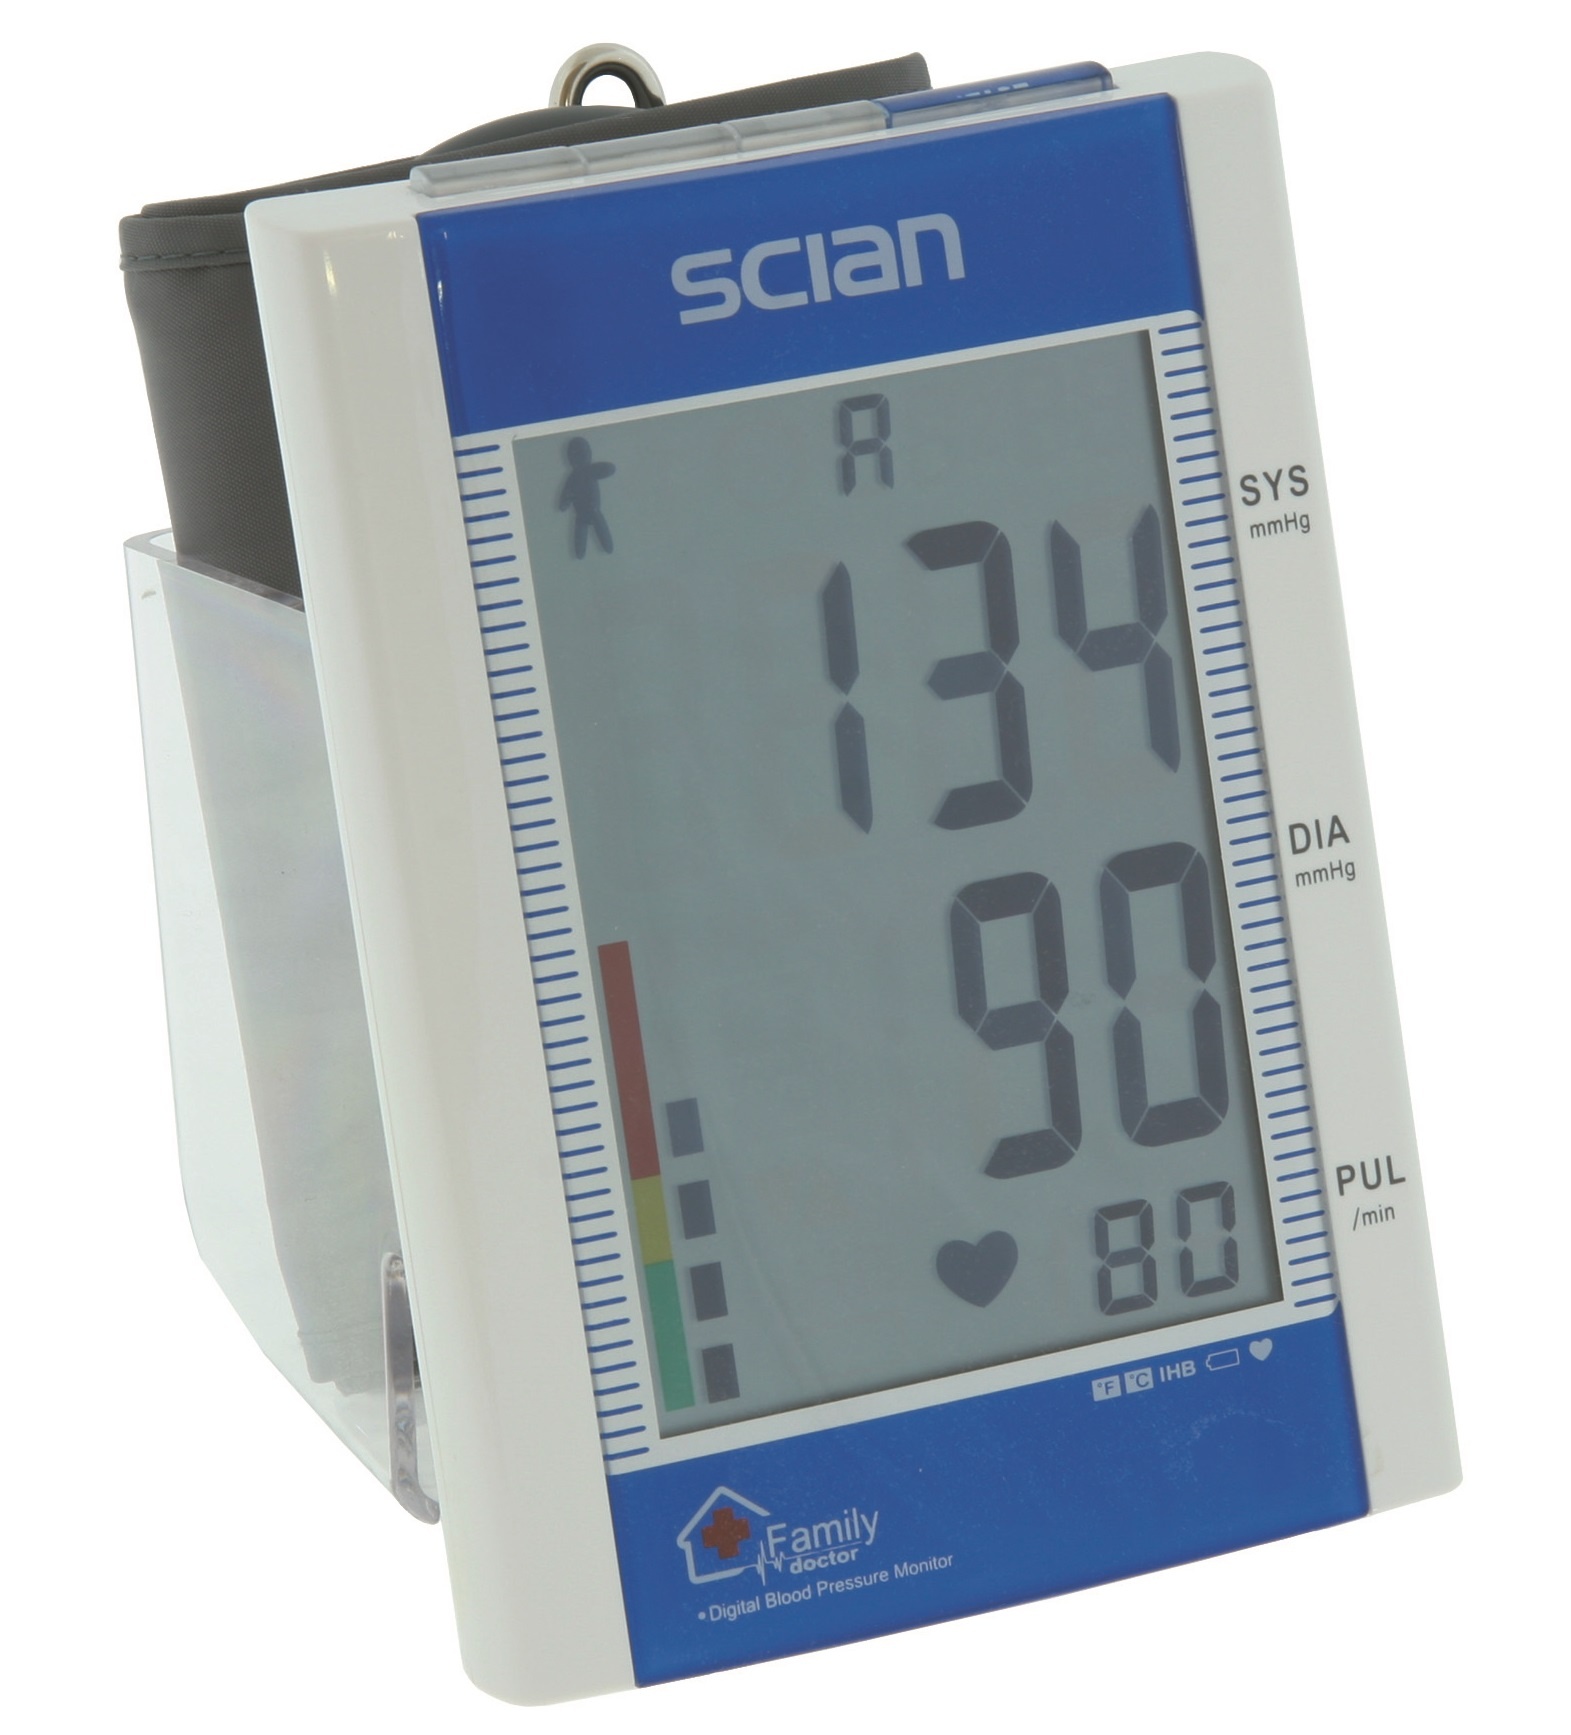 https://images.zeald.com/site/capesmedicalsuppliesnz/images/items/bssdwdc-scian-basic-digital-bp-monitor-with-d-cuff_1.jpg